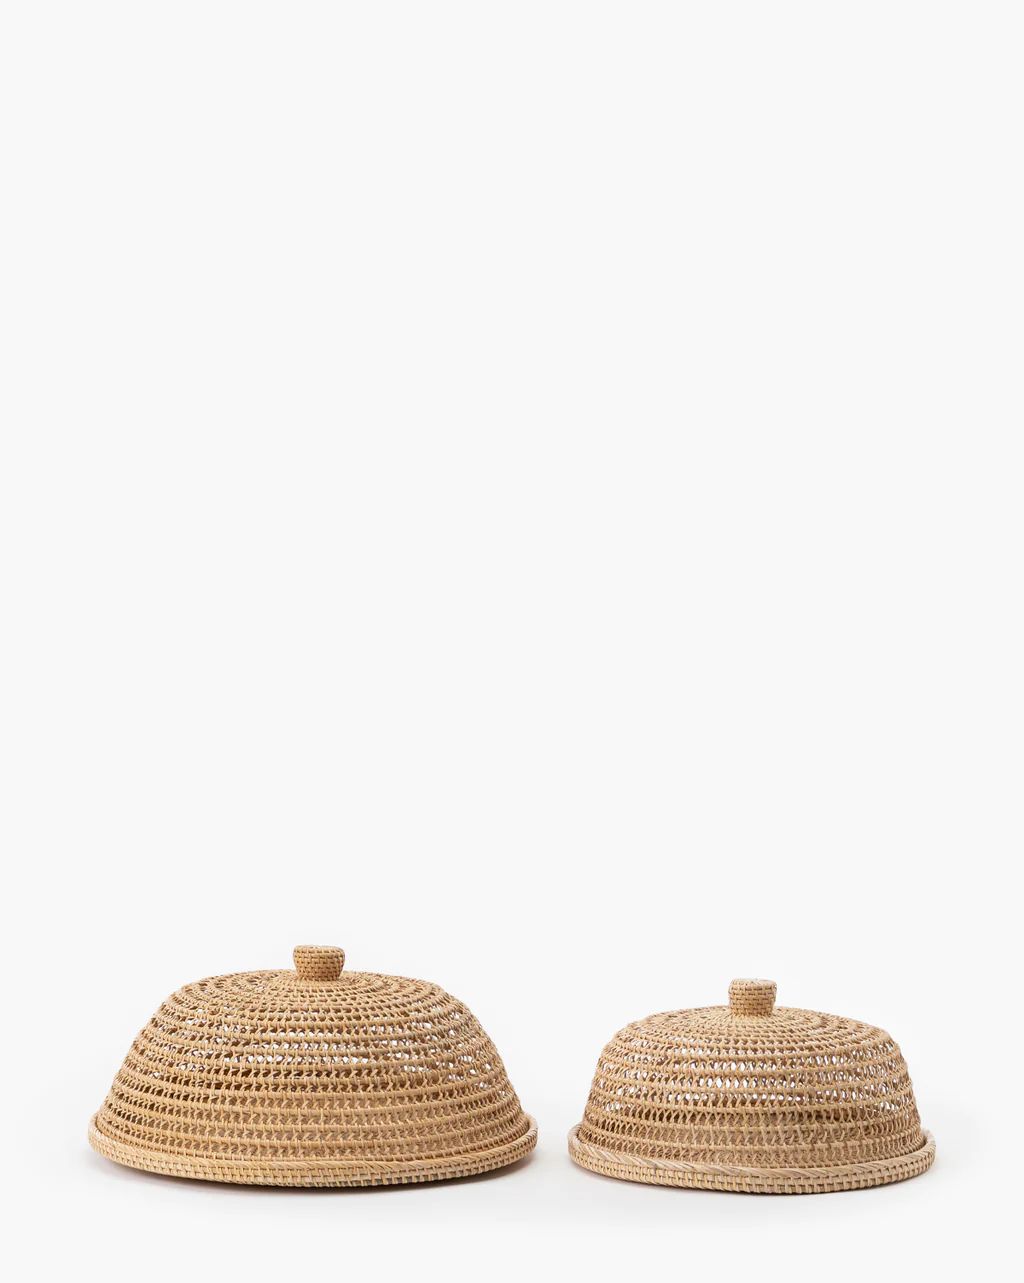 Hand-Woven Rattan Food Tray with Cover (Set of 2) | McGee & Co.